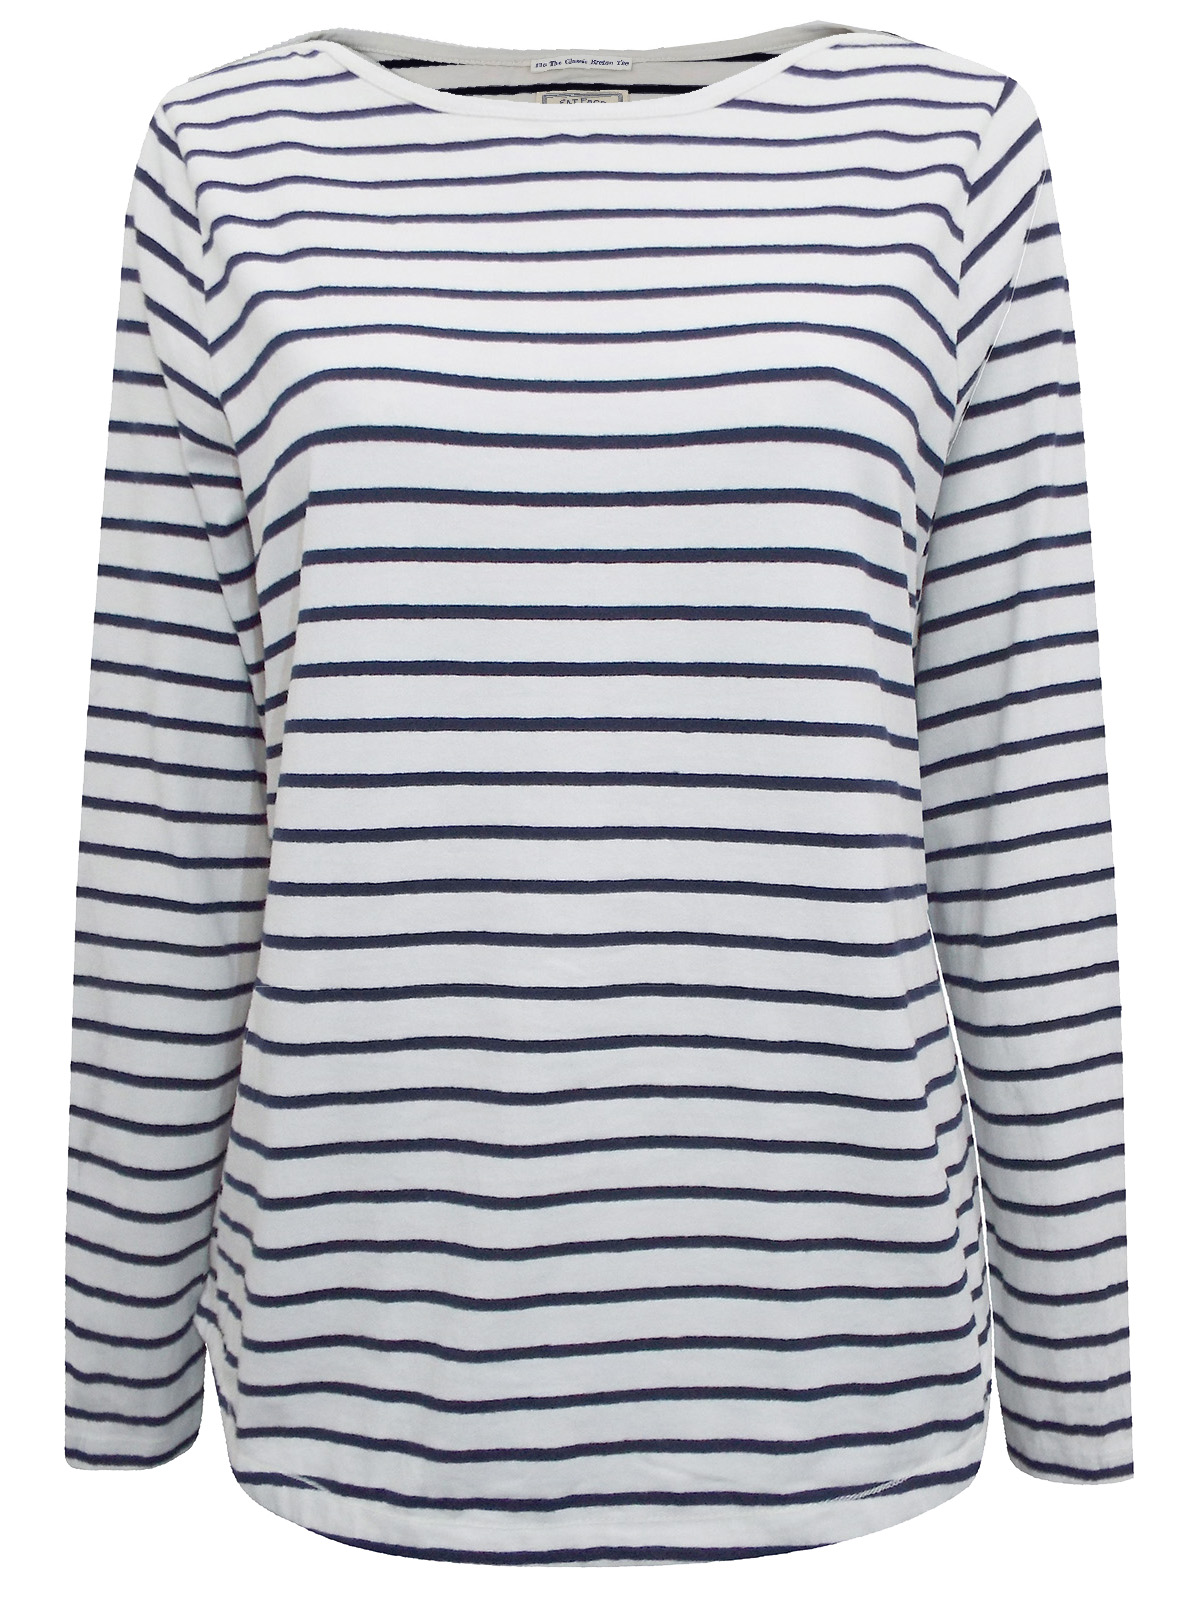 FAT FACE - - Fat Face The Classic Breton Tee, White Navy Stripe - sizes ...